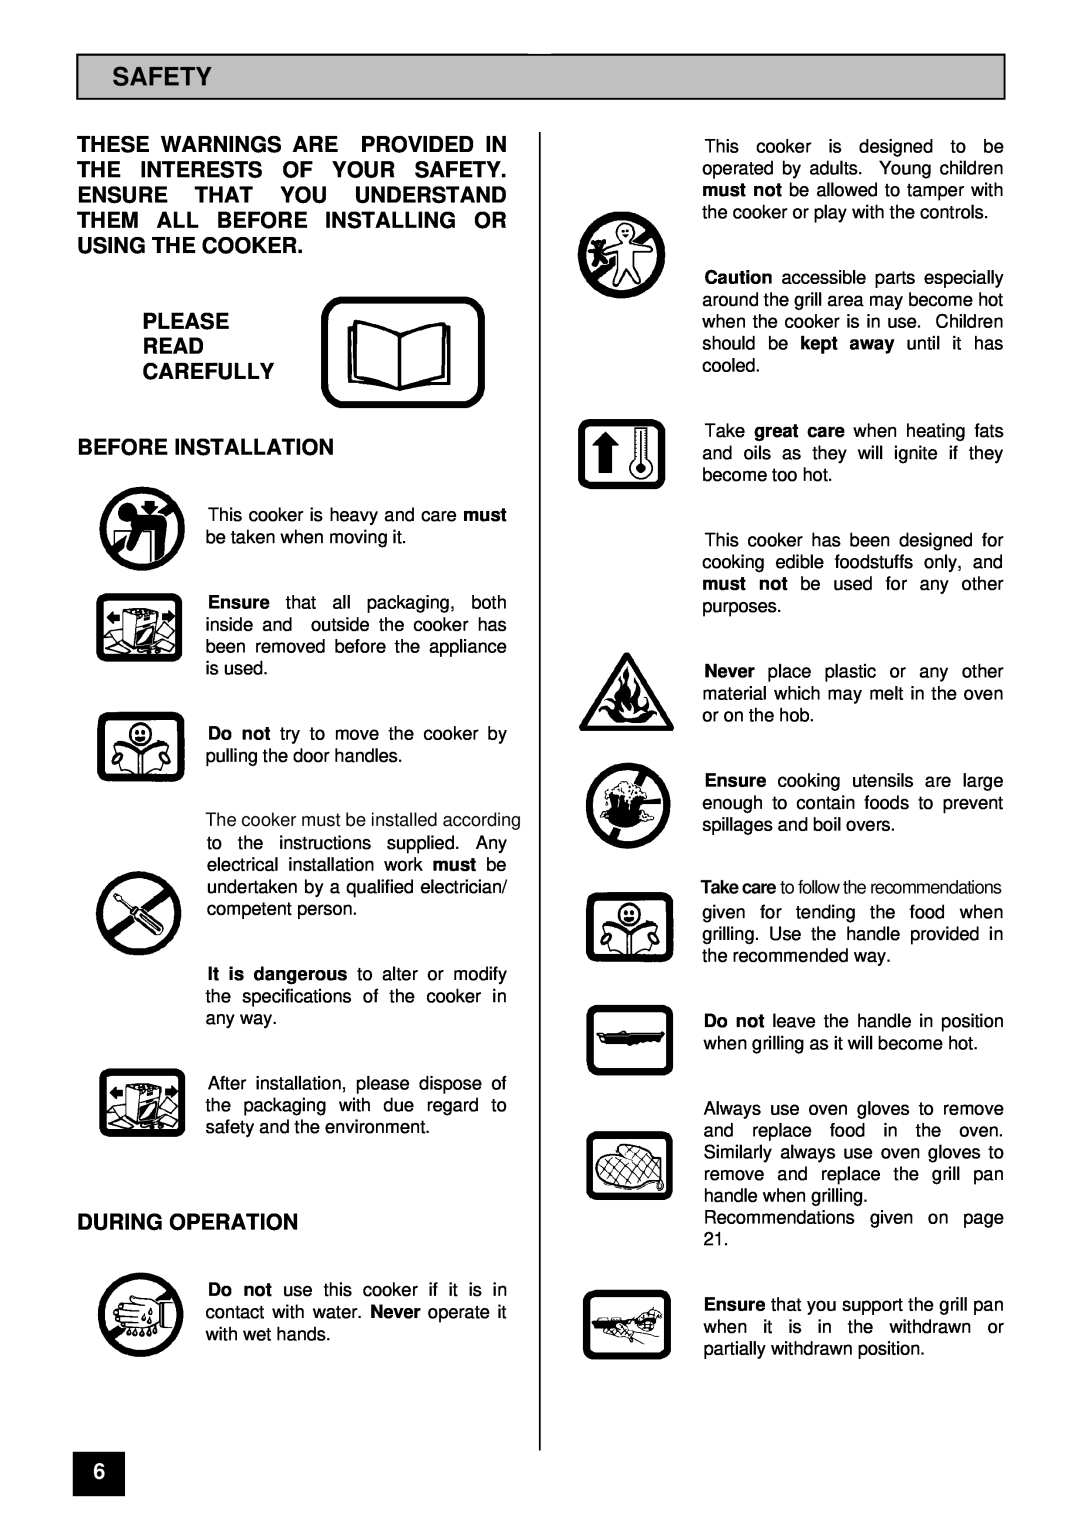 Tricity Bendix BS 615 SO installation instructions Safety, Please Read Carefully Before Installation, During Operation 